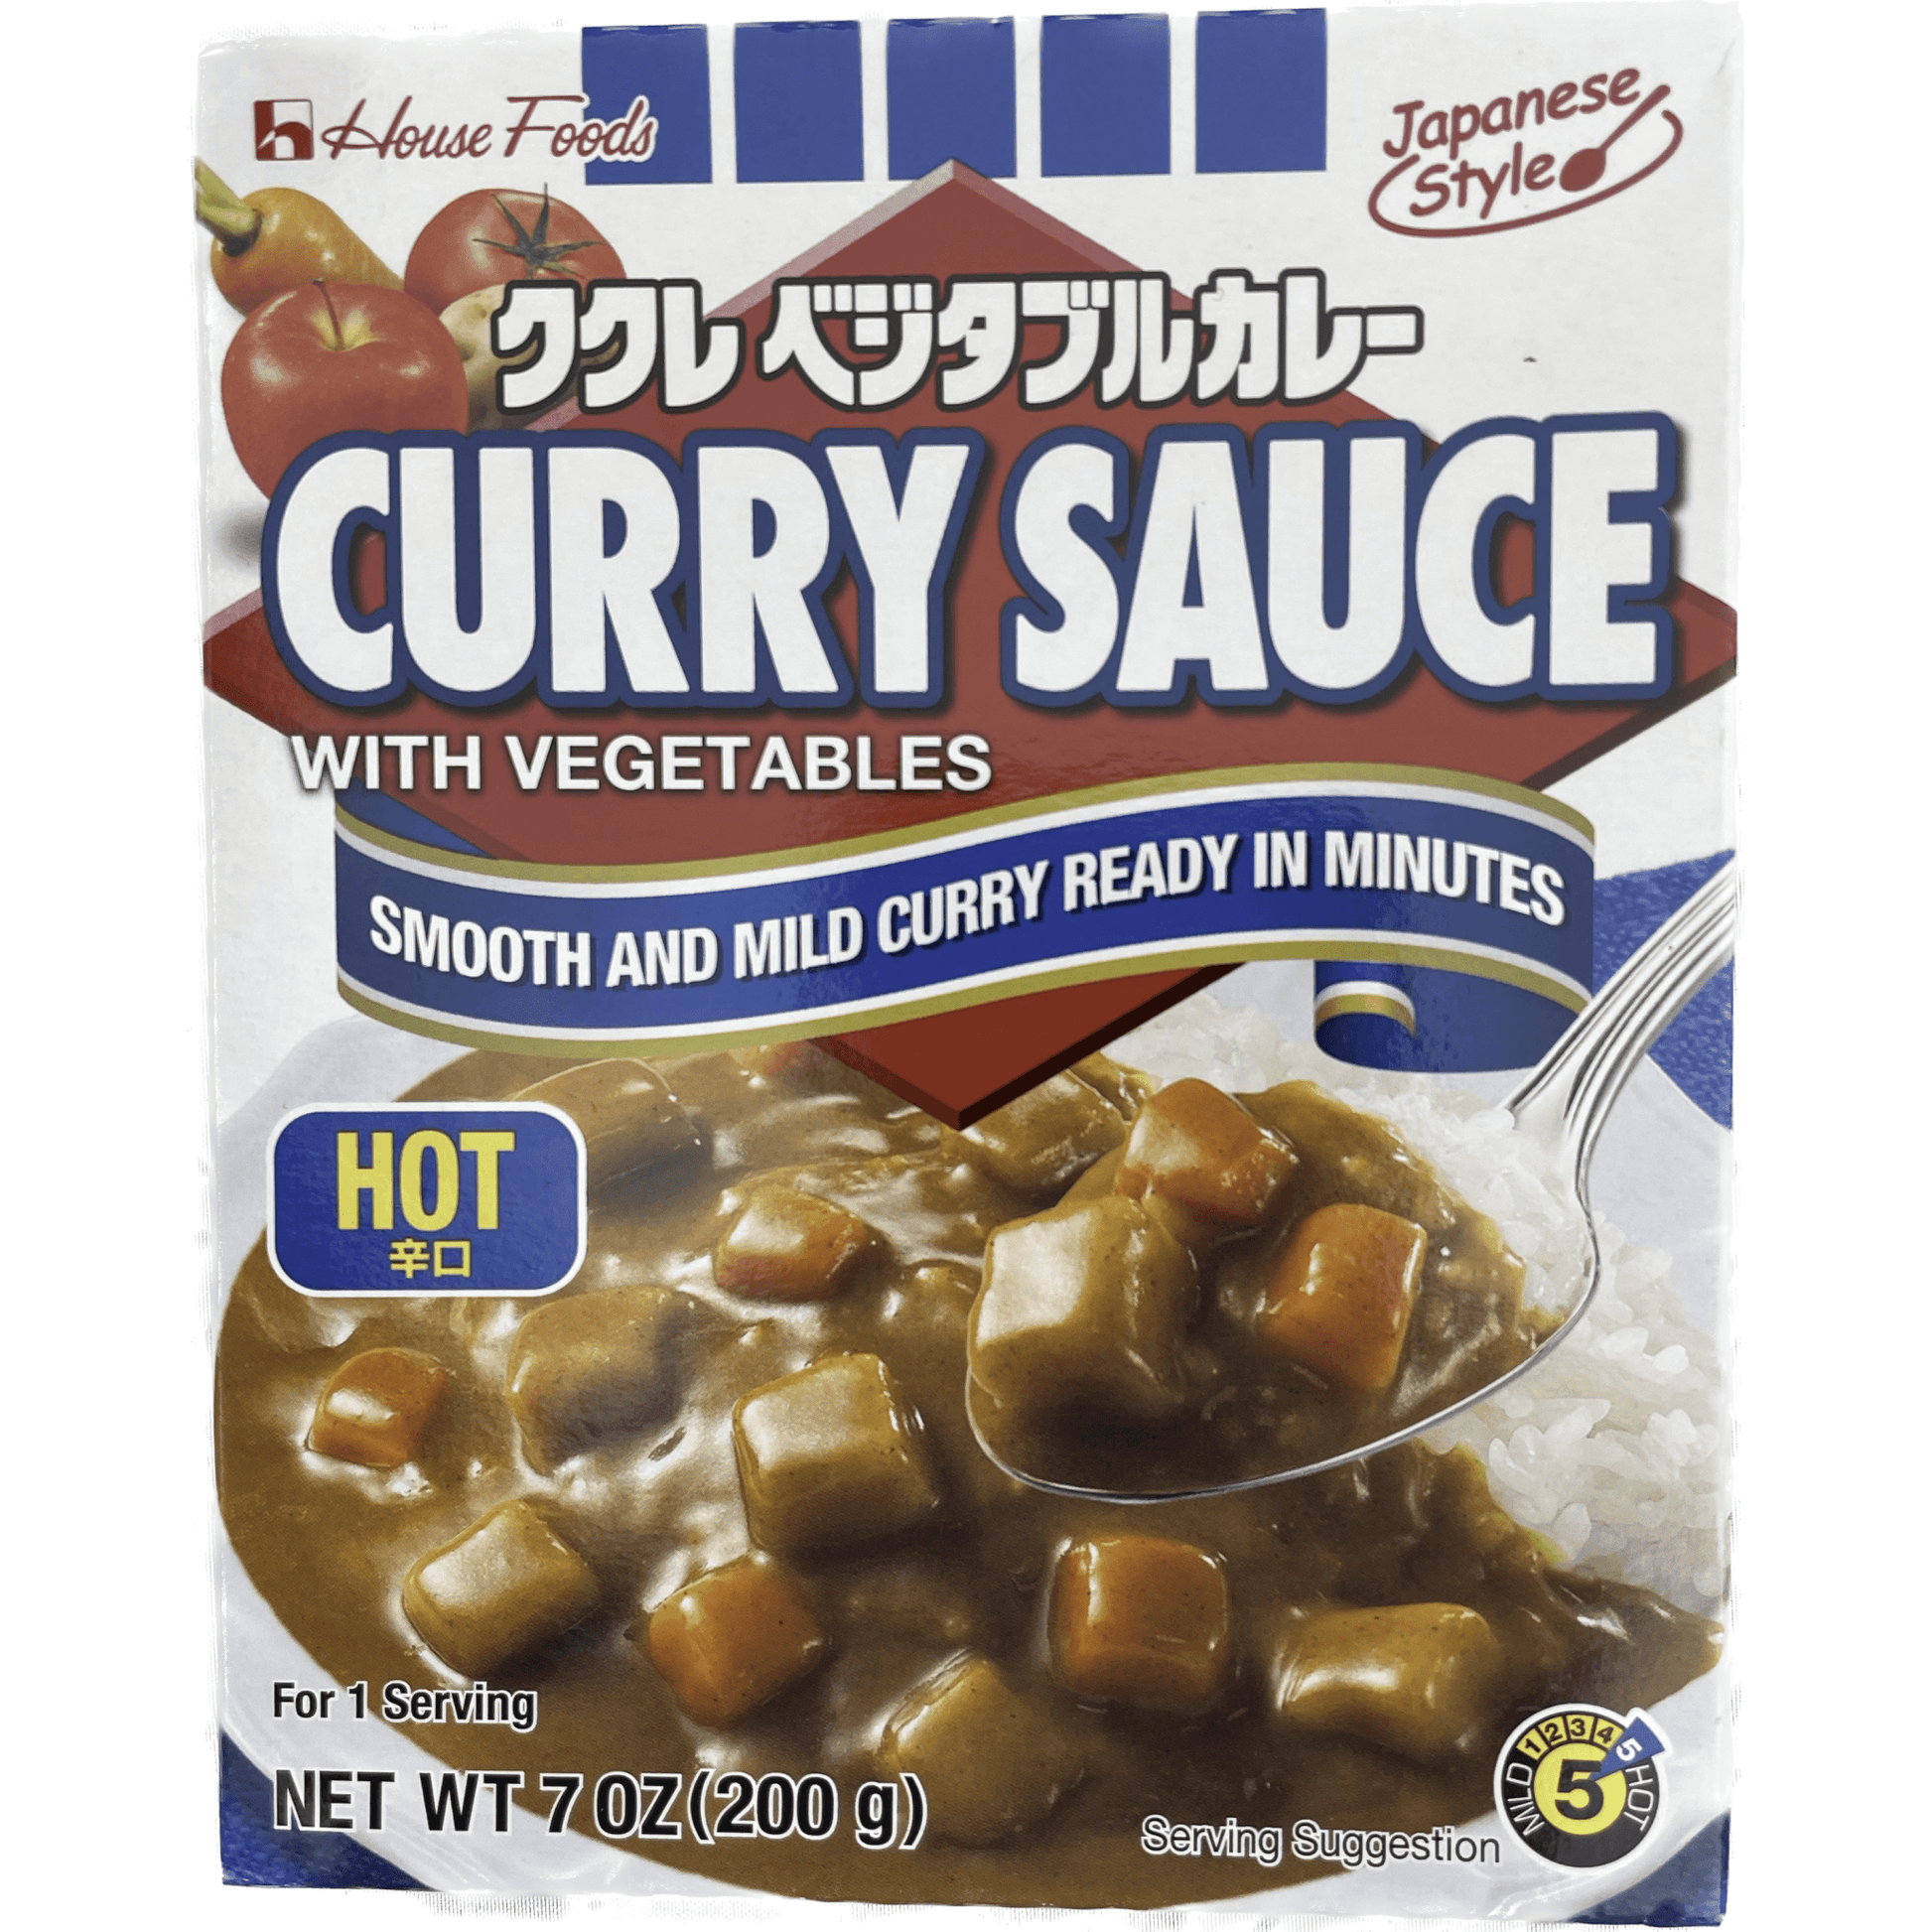 House Curry Sauce with Vegetables (Hot) - RiceWineShop